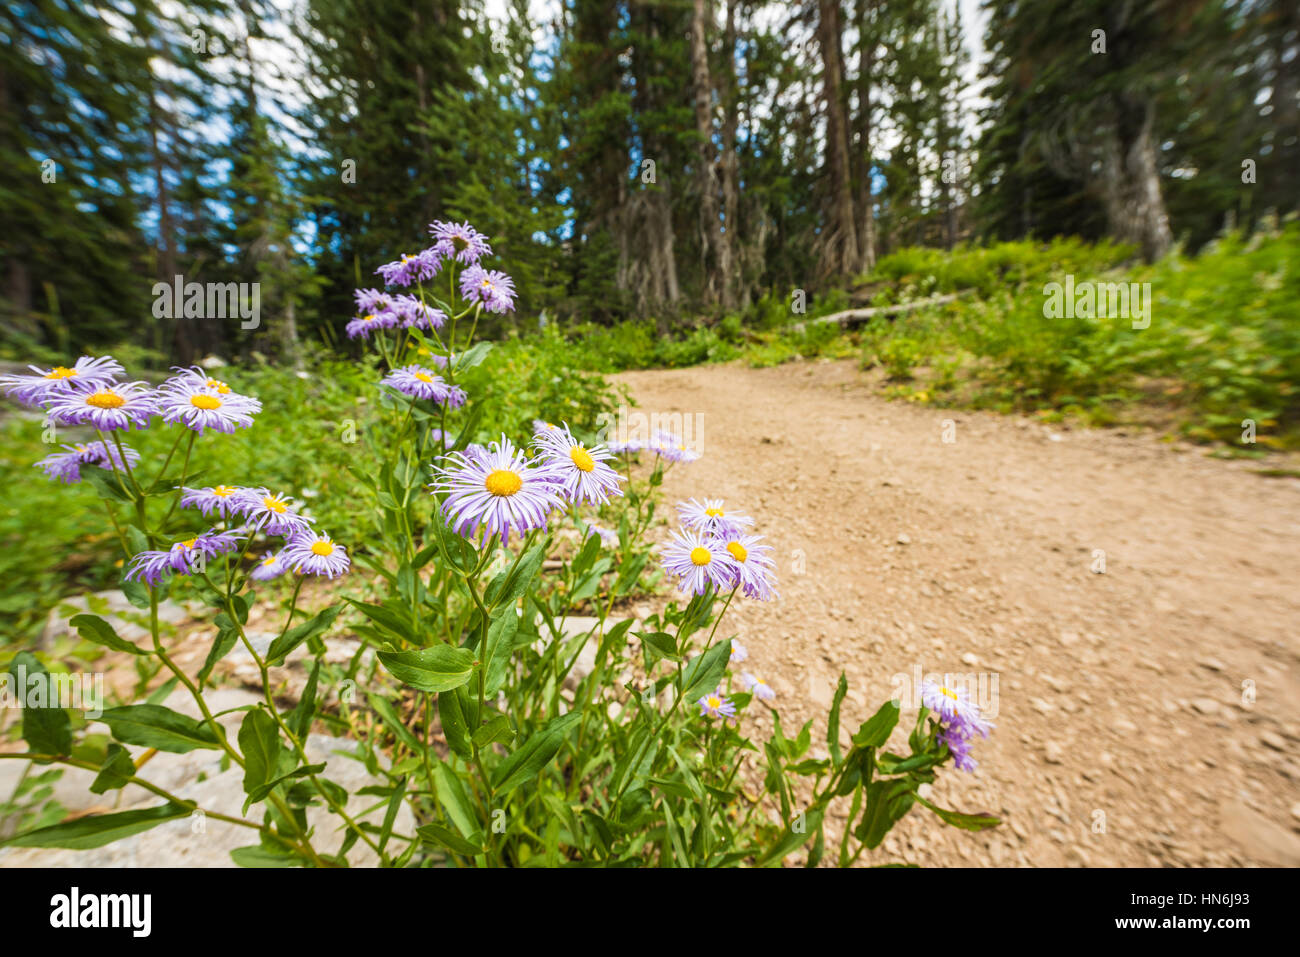 Showy Daisy/Fleabane wildflowers near a dirt road in alpine forest in Albion Basin close to Salt Lake City Stock Photo